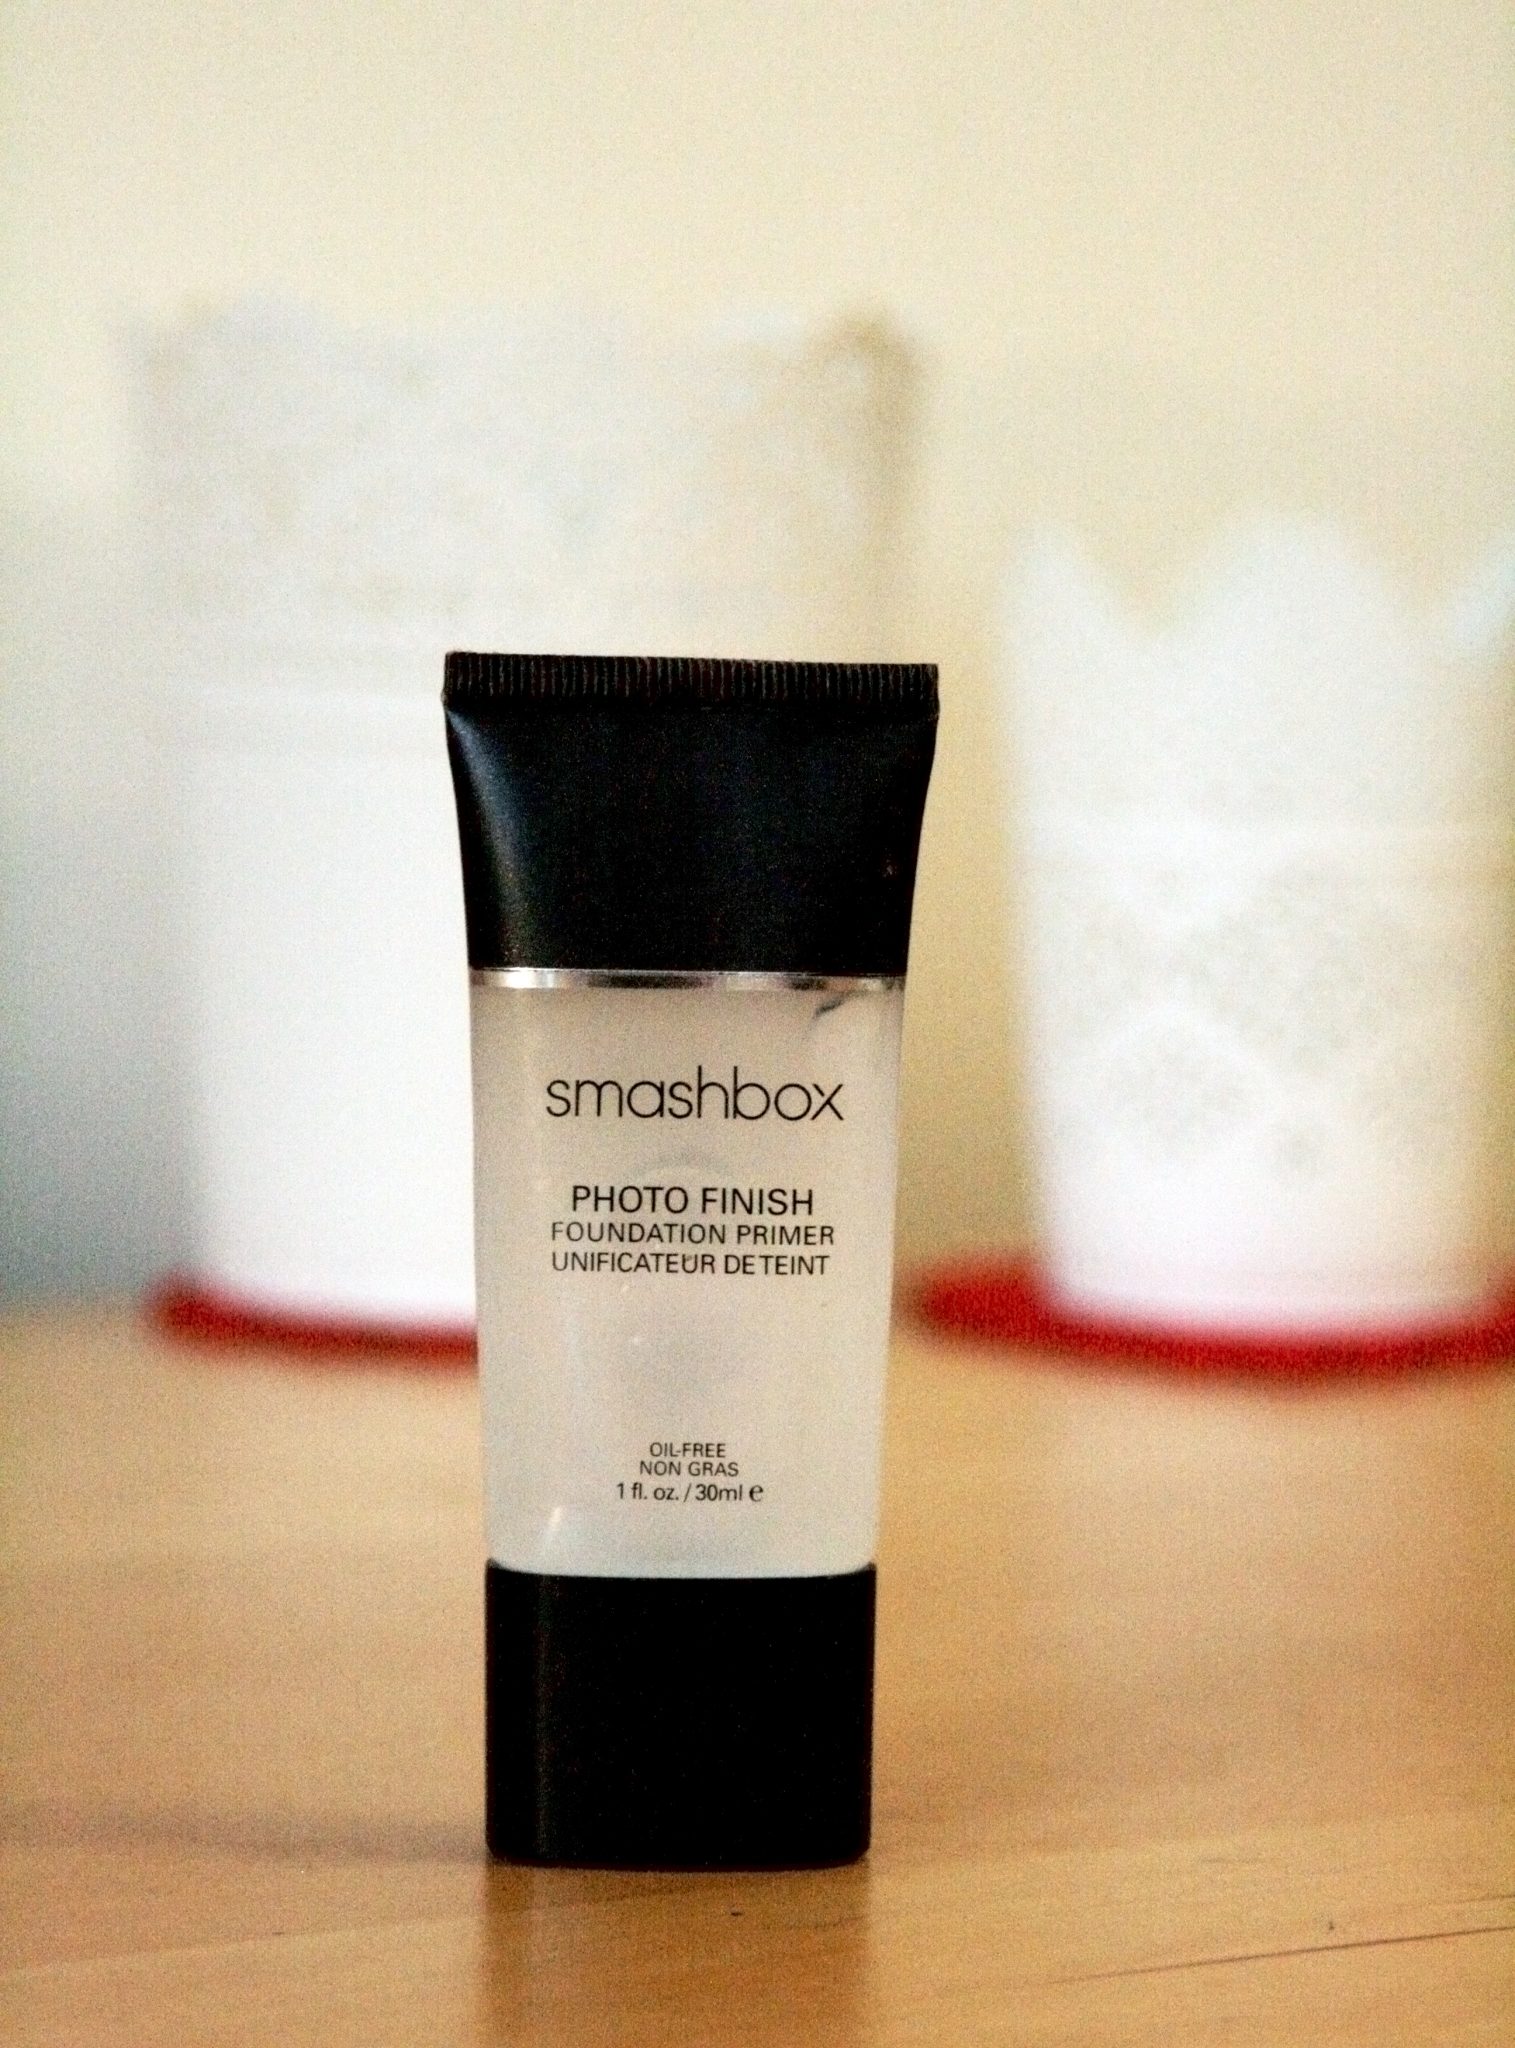 Smashbox photo finish primer. Glossier inspired natural beauty products reviews. manchester based fashion lifestyle and beauty blog